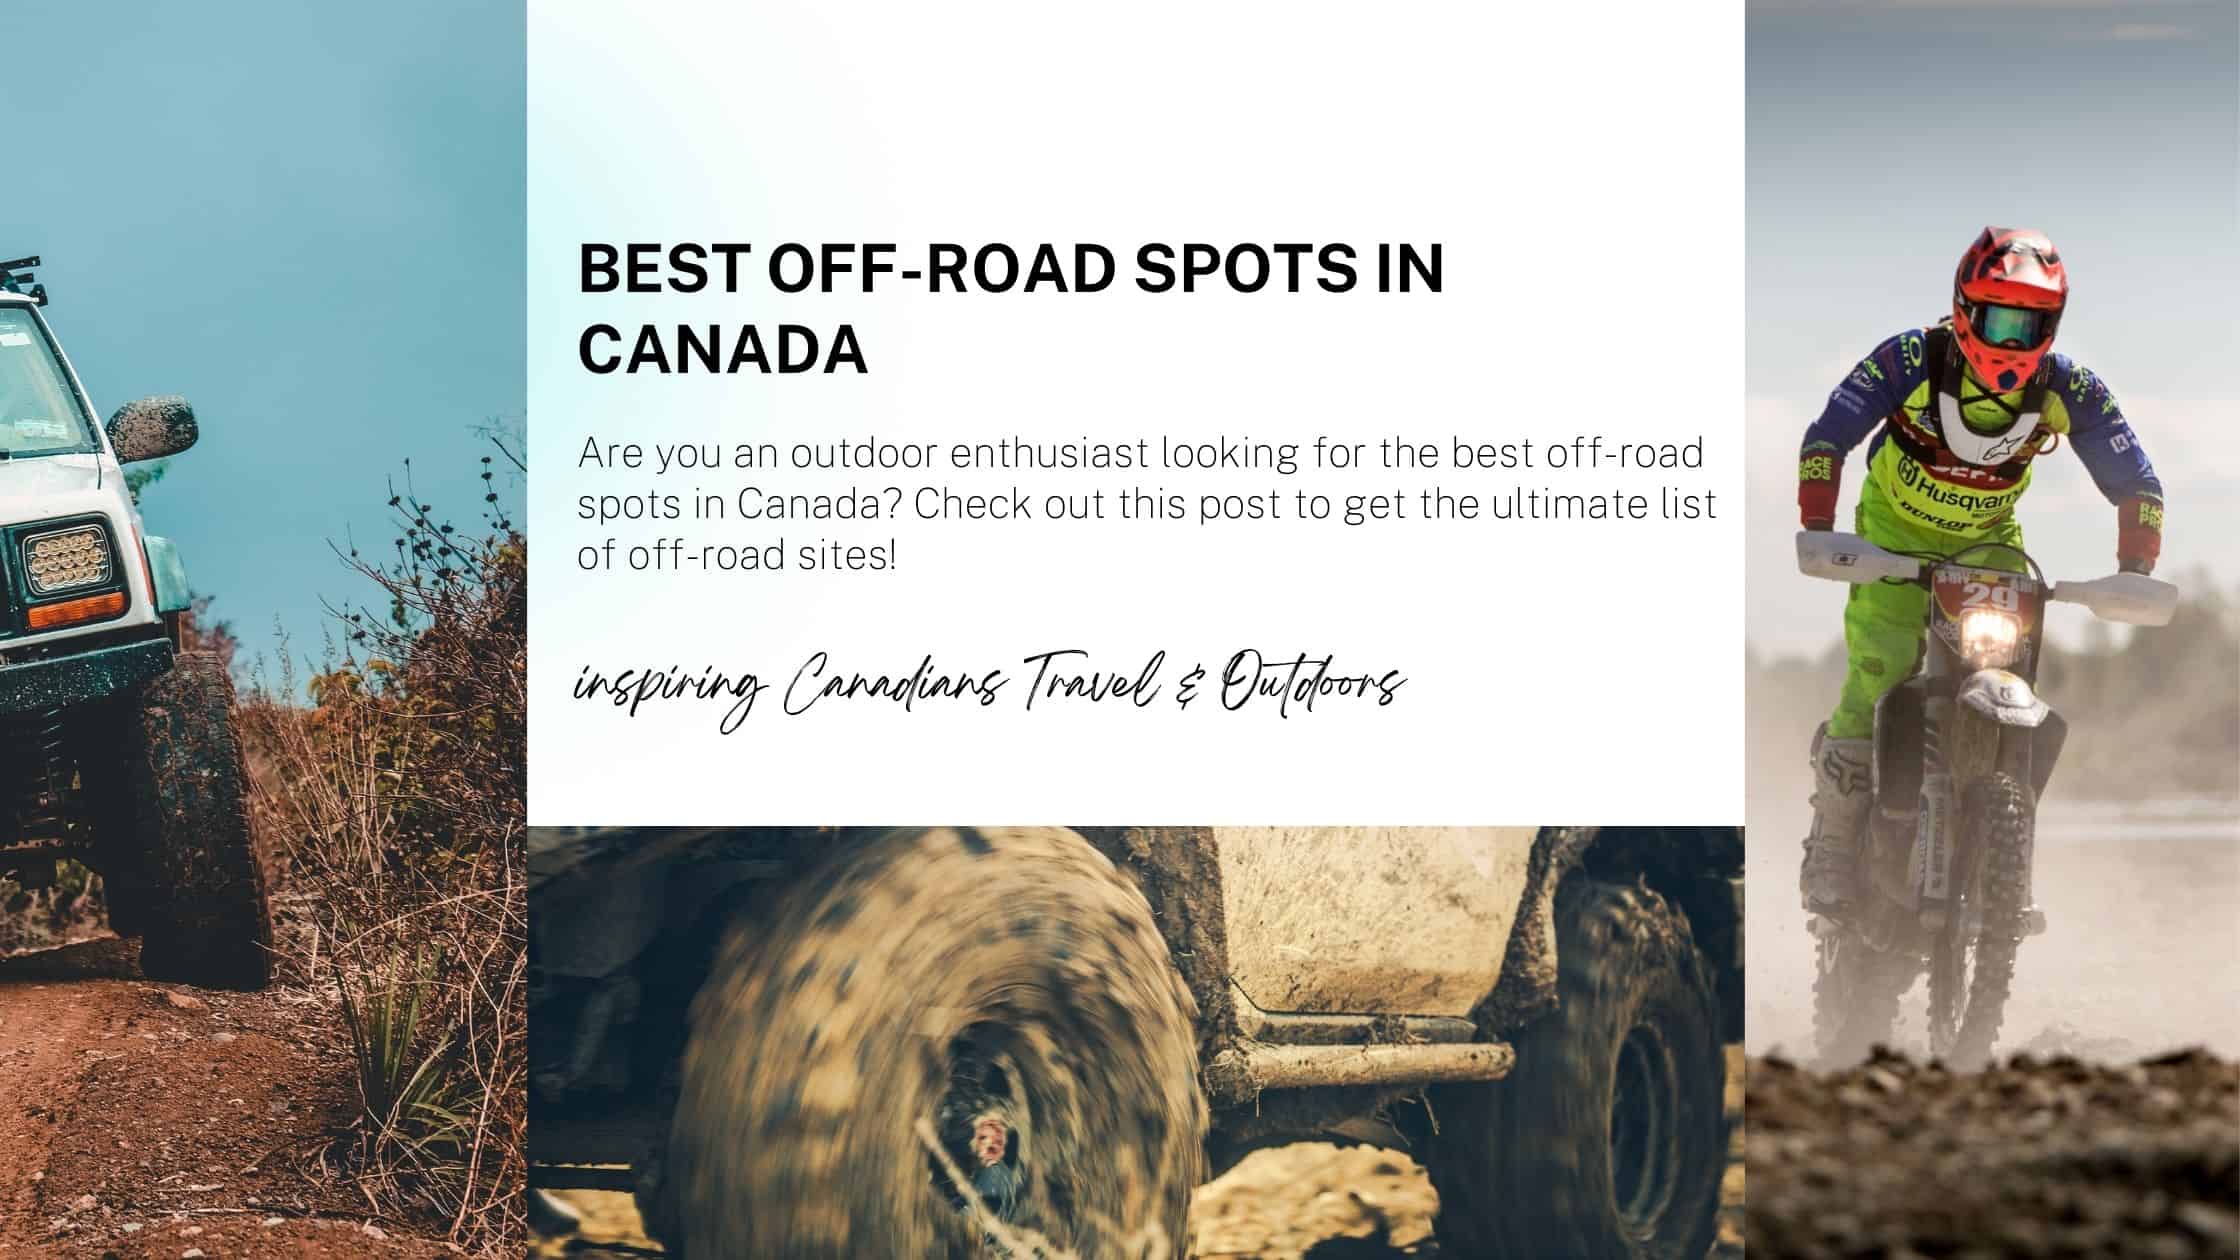 Best off-road spots in Canada